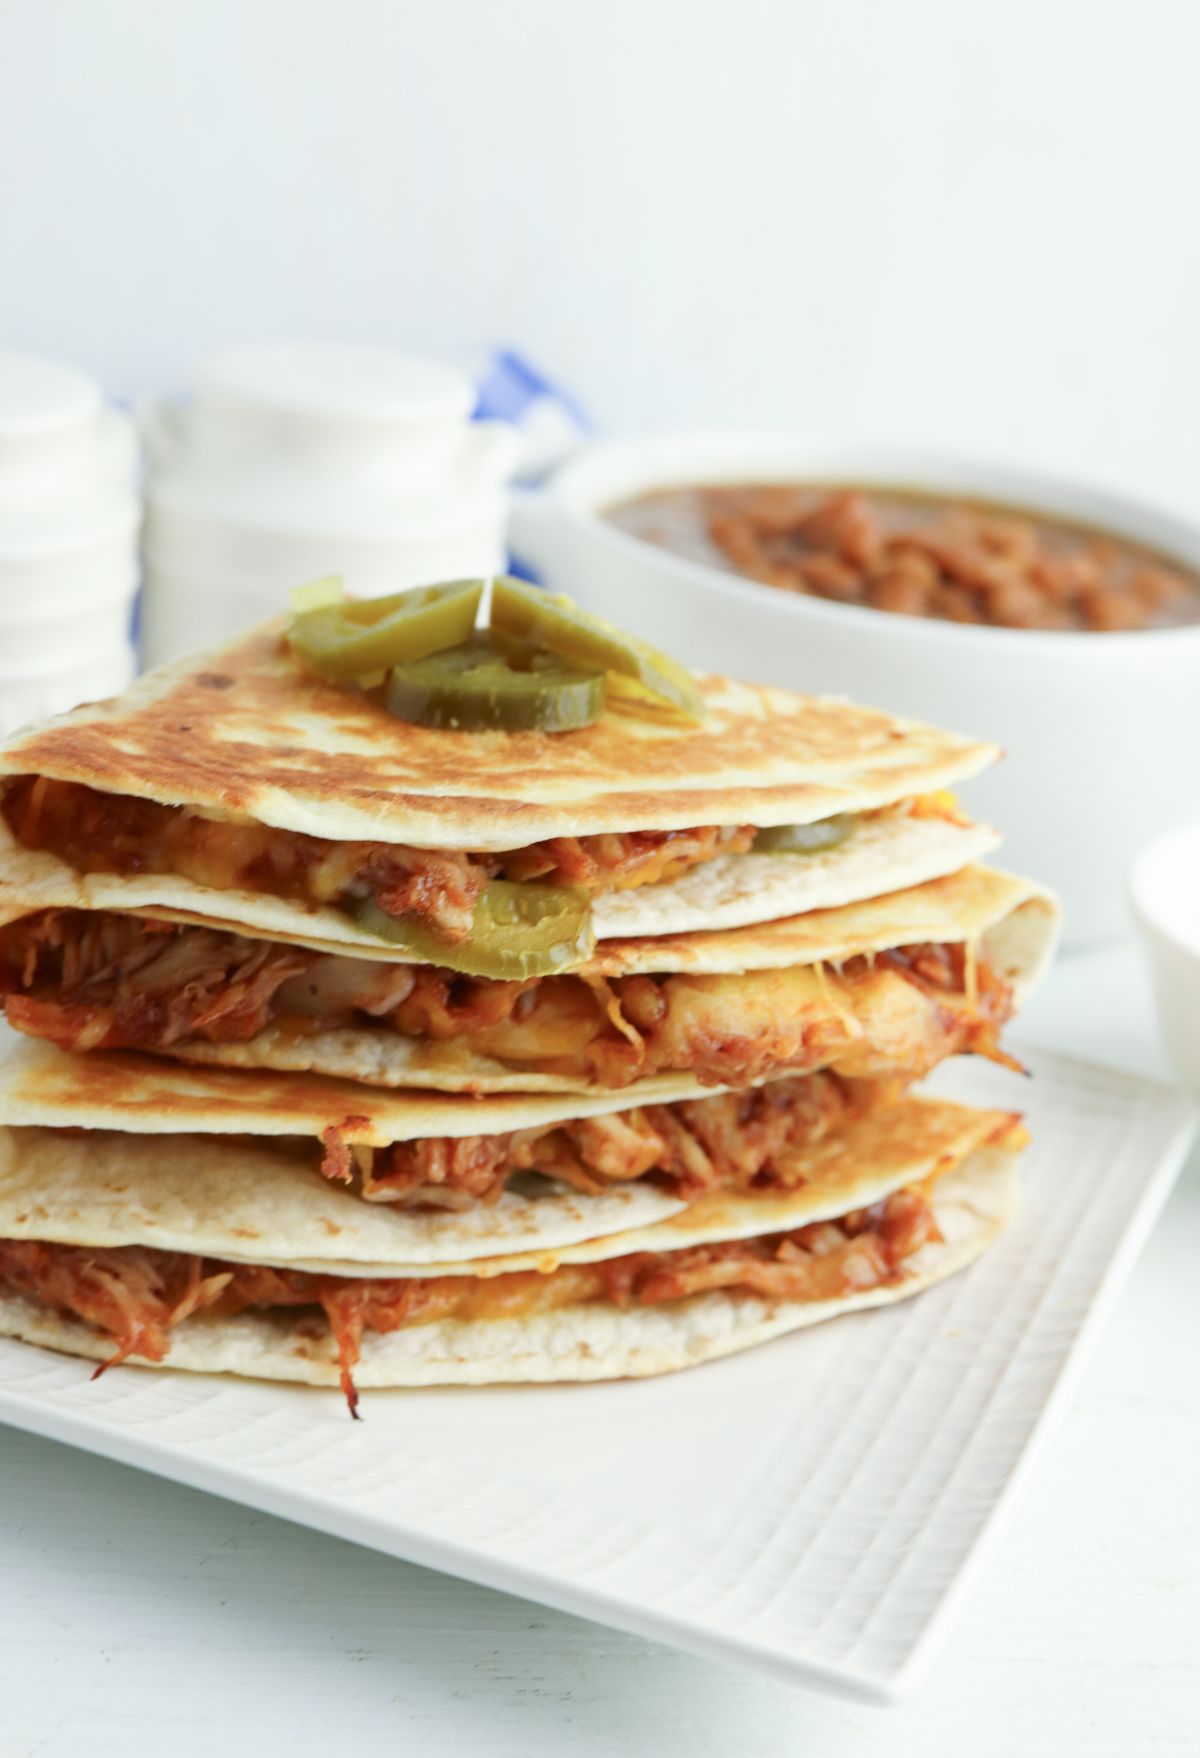 Stacked chicken quesadillas with pickled jalapeños on top, served on a rectangular white plate against a backdrop of more quesadillas and a side dish.